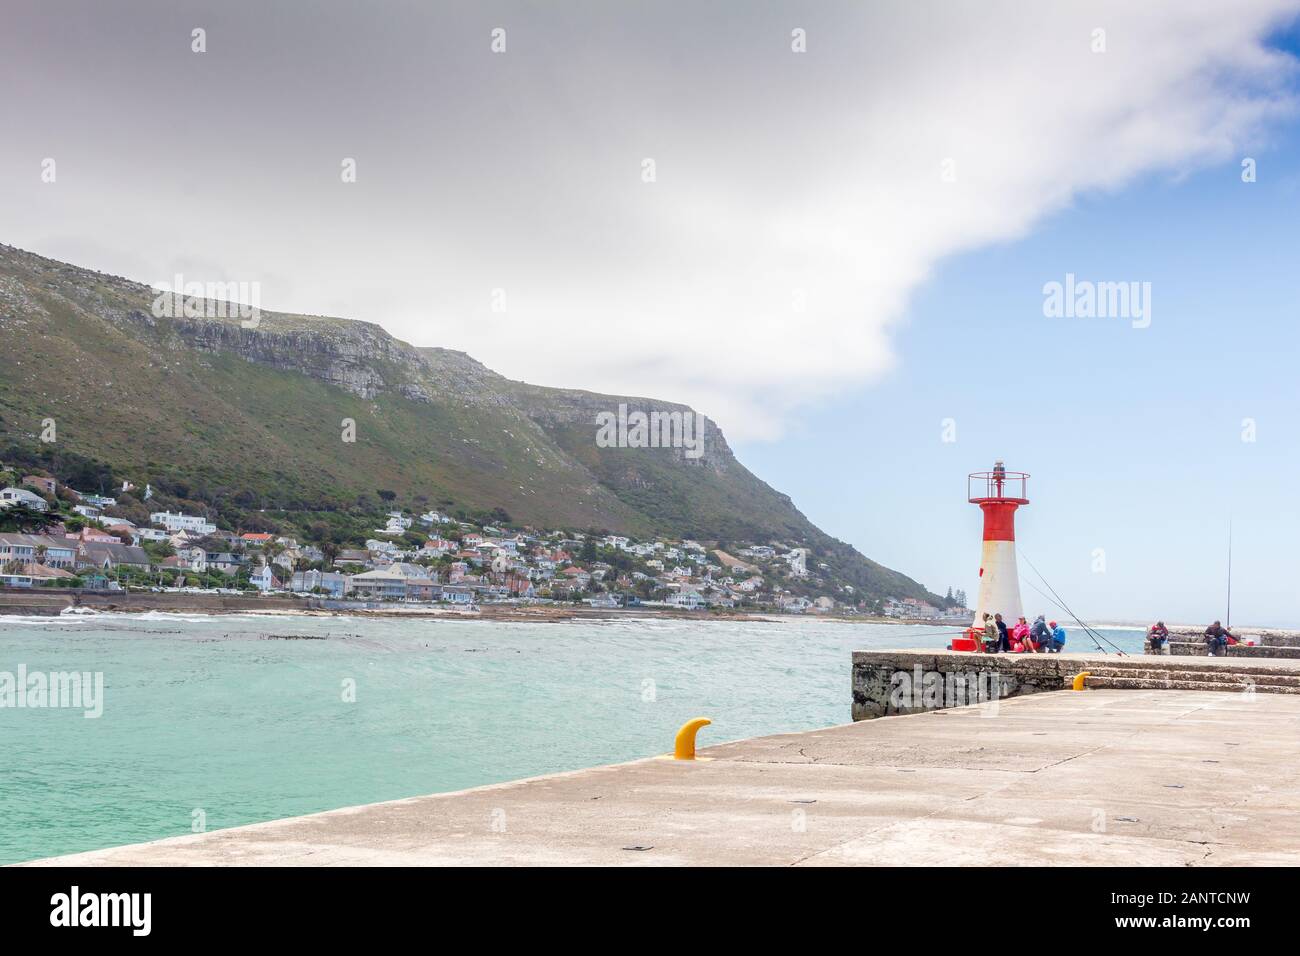 KALK BAY, WESTERN CAPE PROVINCE, SOUTH AFRICA - DECEMBER 30 2019: Recreational pier with beacon built in 1919 and fishermen at Kalk Bay harbour near C Stock Photo